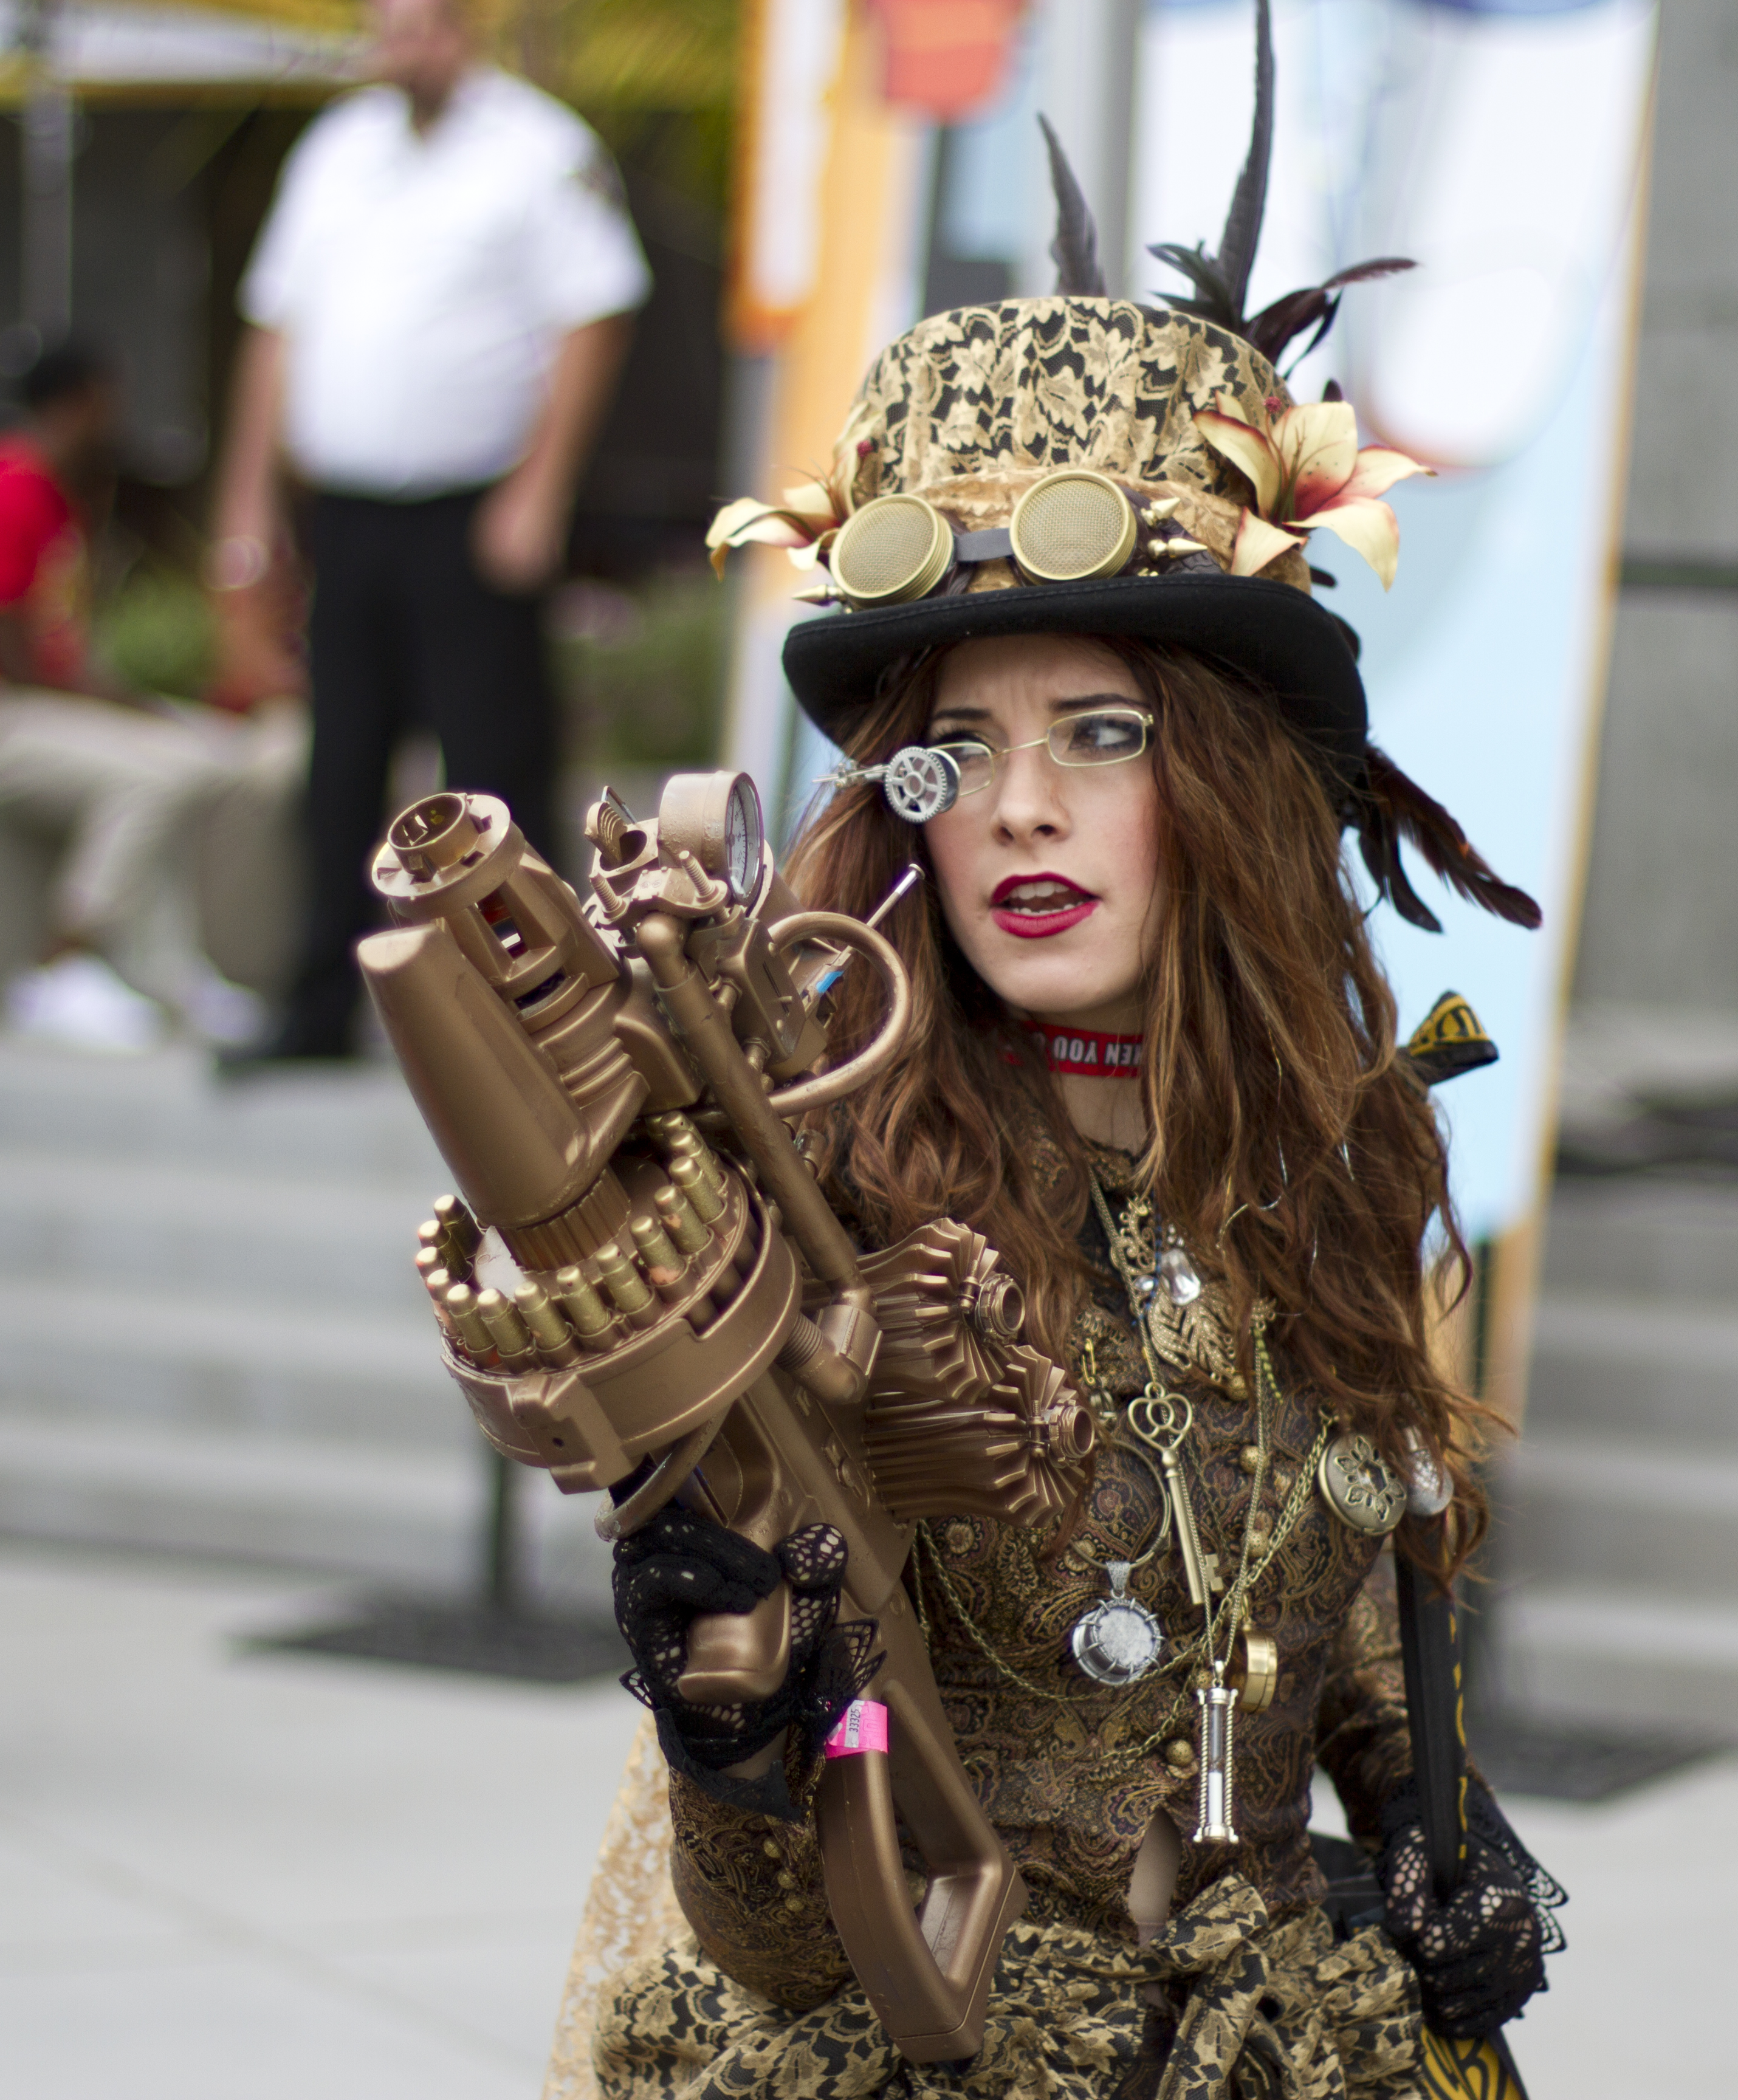 Amazing Steampunk outfit and gun